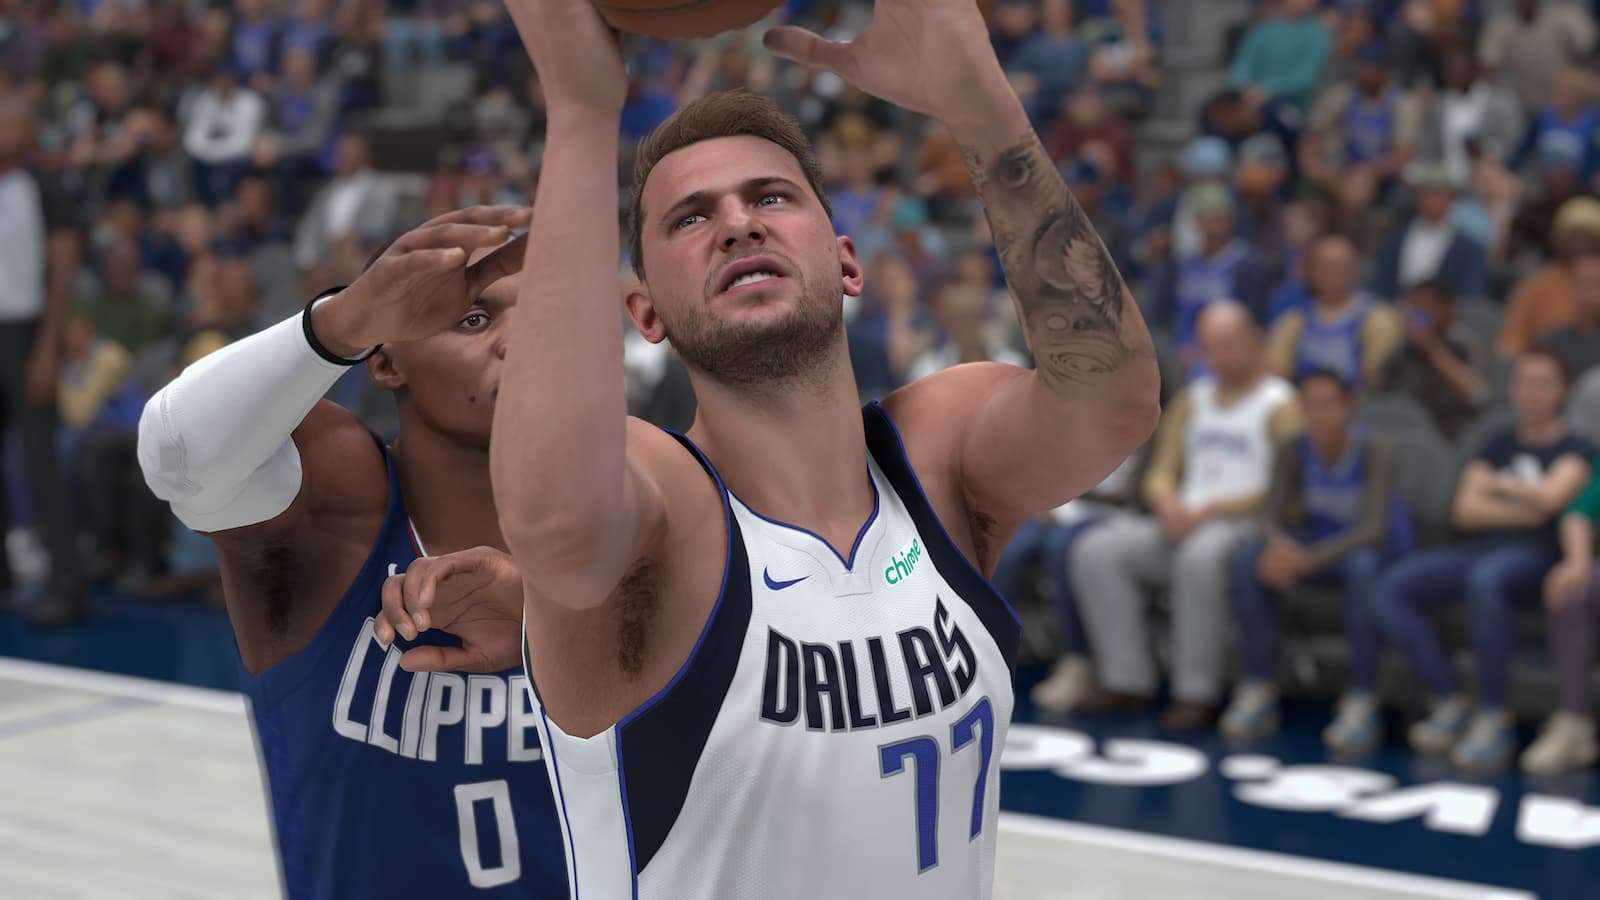 Luka Doncic in NBA 2K24